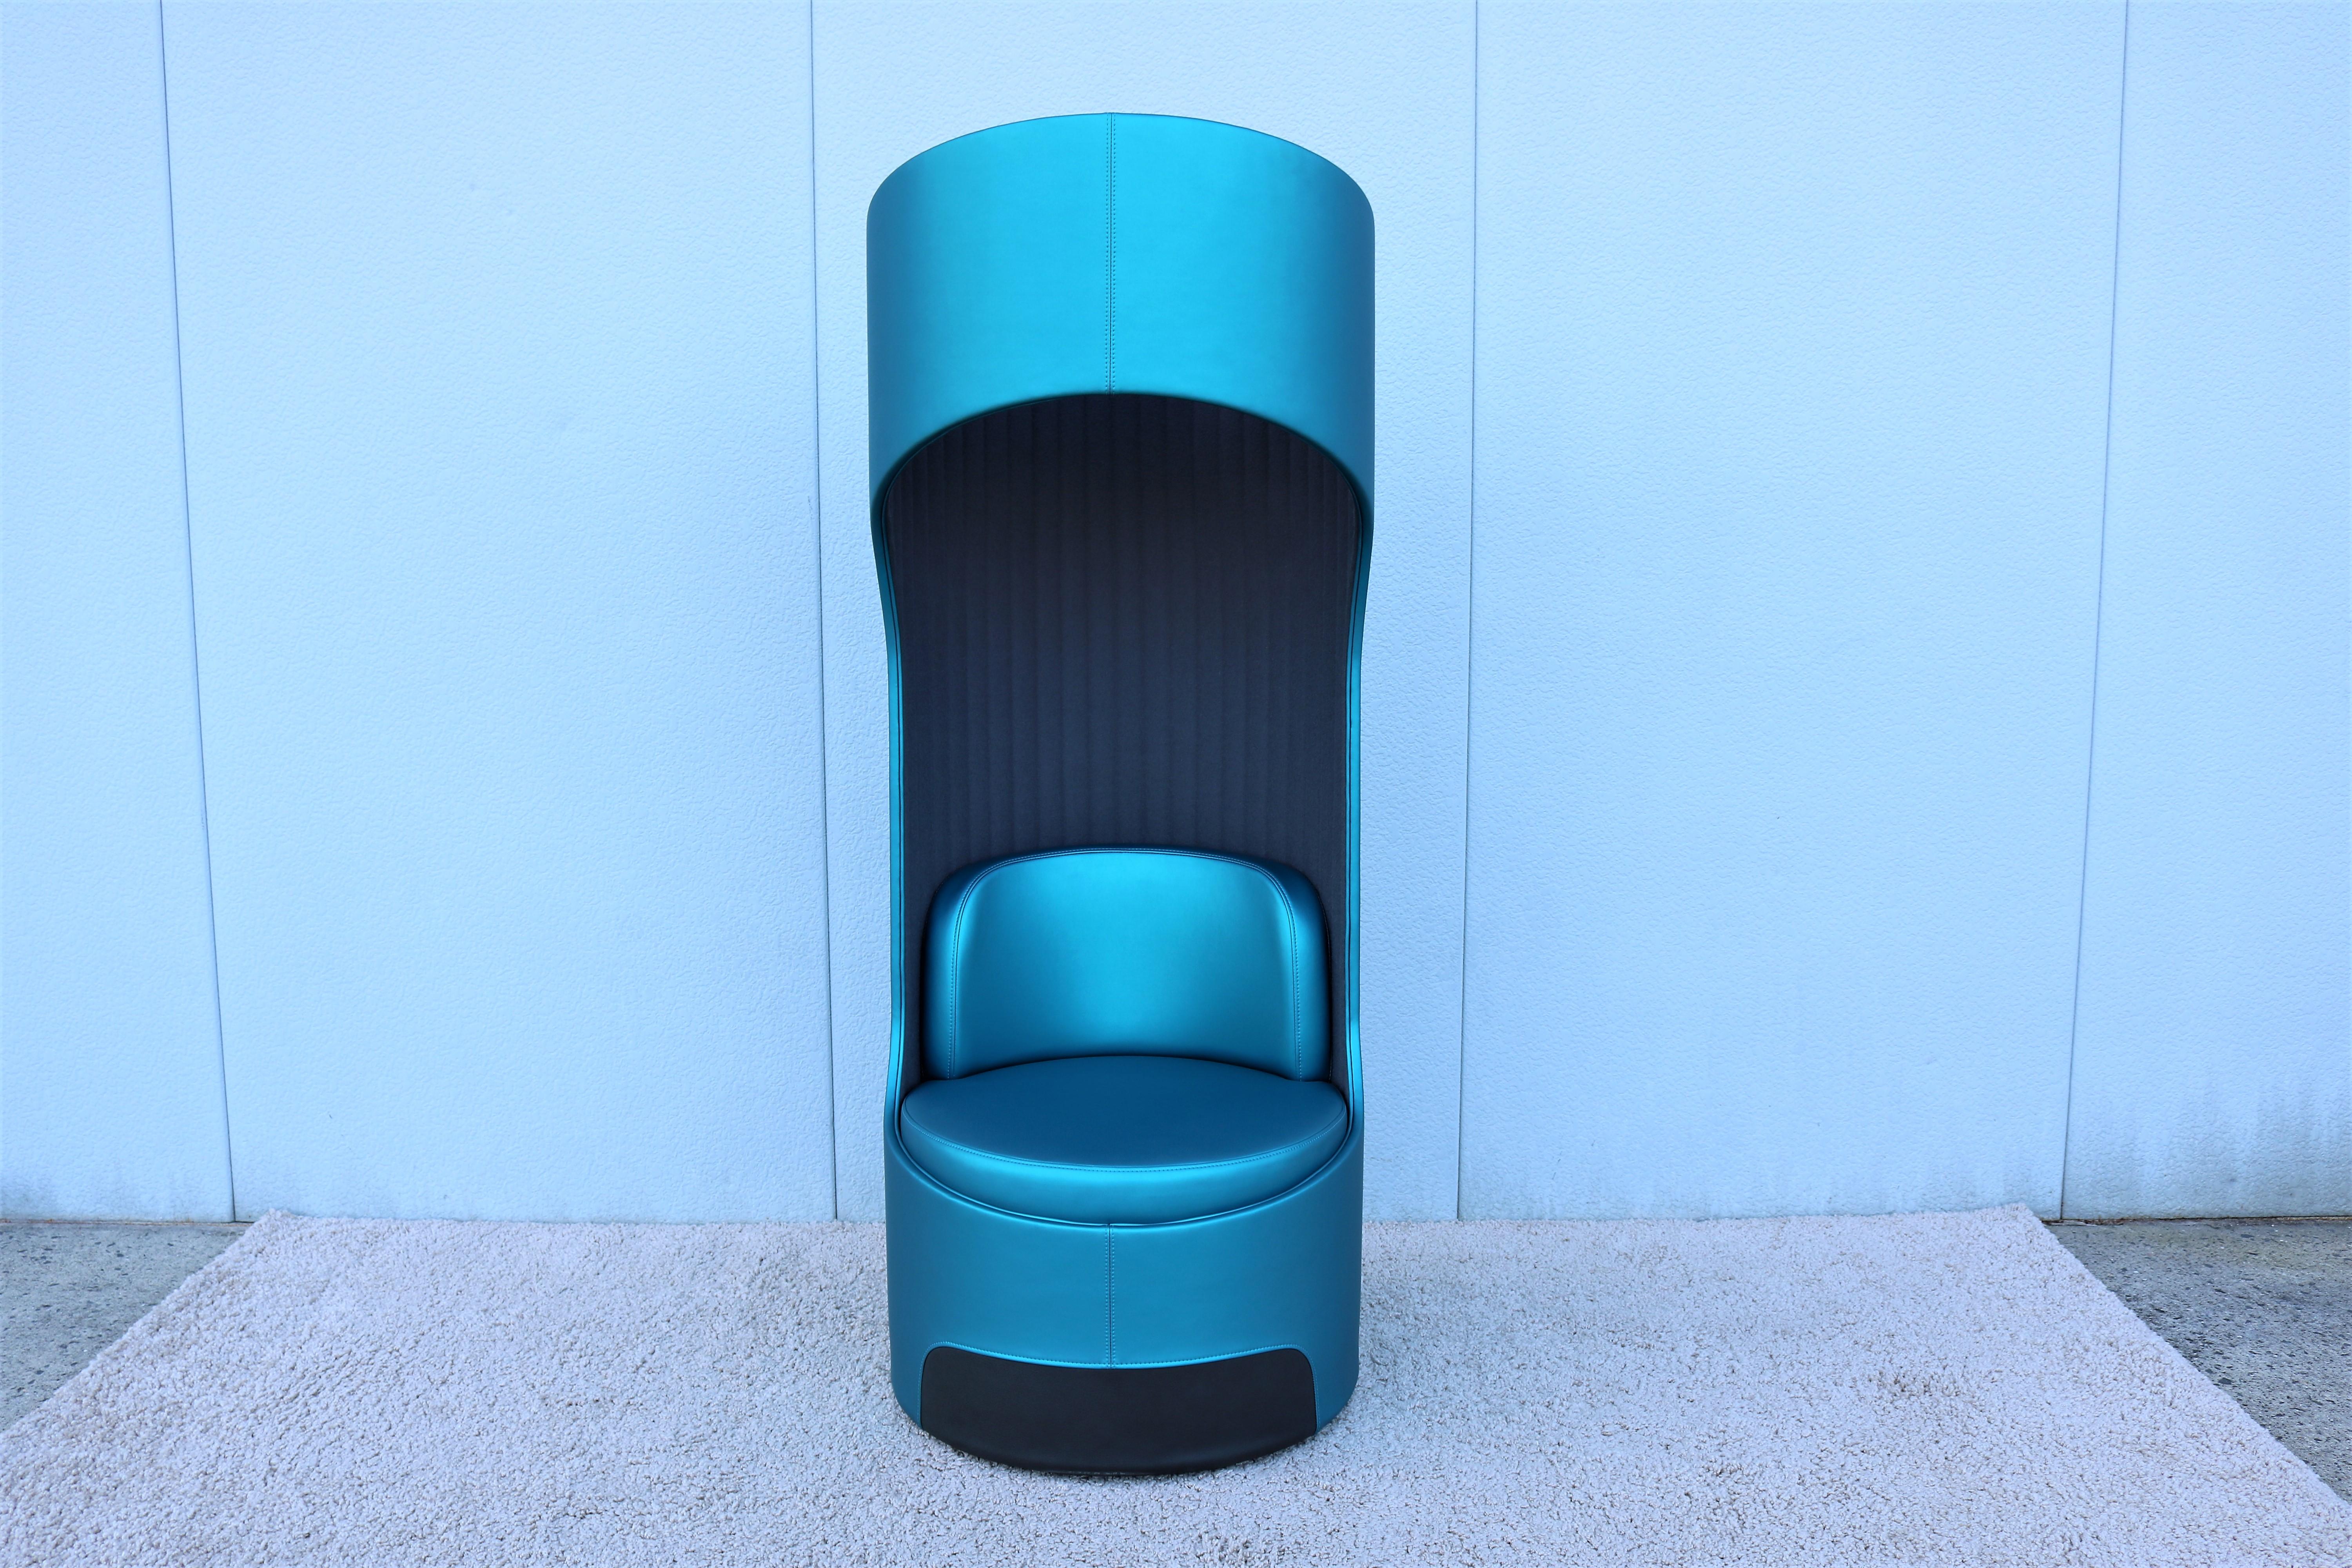 The Cega high-back chair by Boss Design has a symmetrical tubular shape and boasts superior acoustic qualities.
Its unique design has been developed intentionally to reduce external noise and peripheral vision.
It creates private areas in open